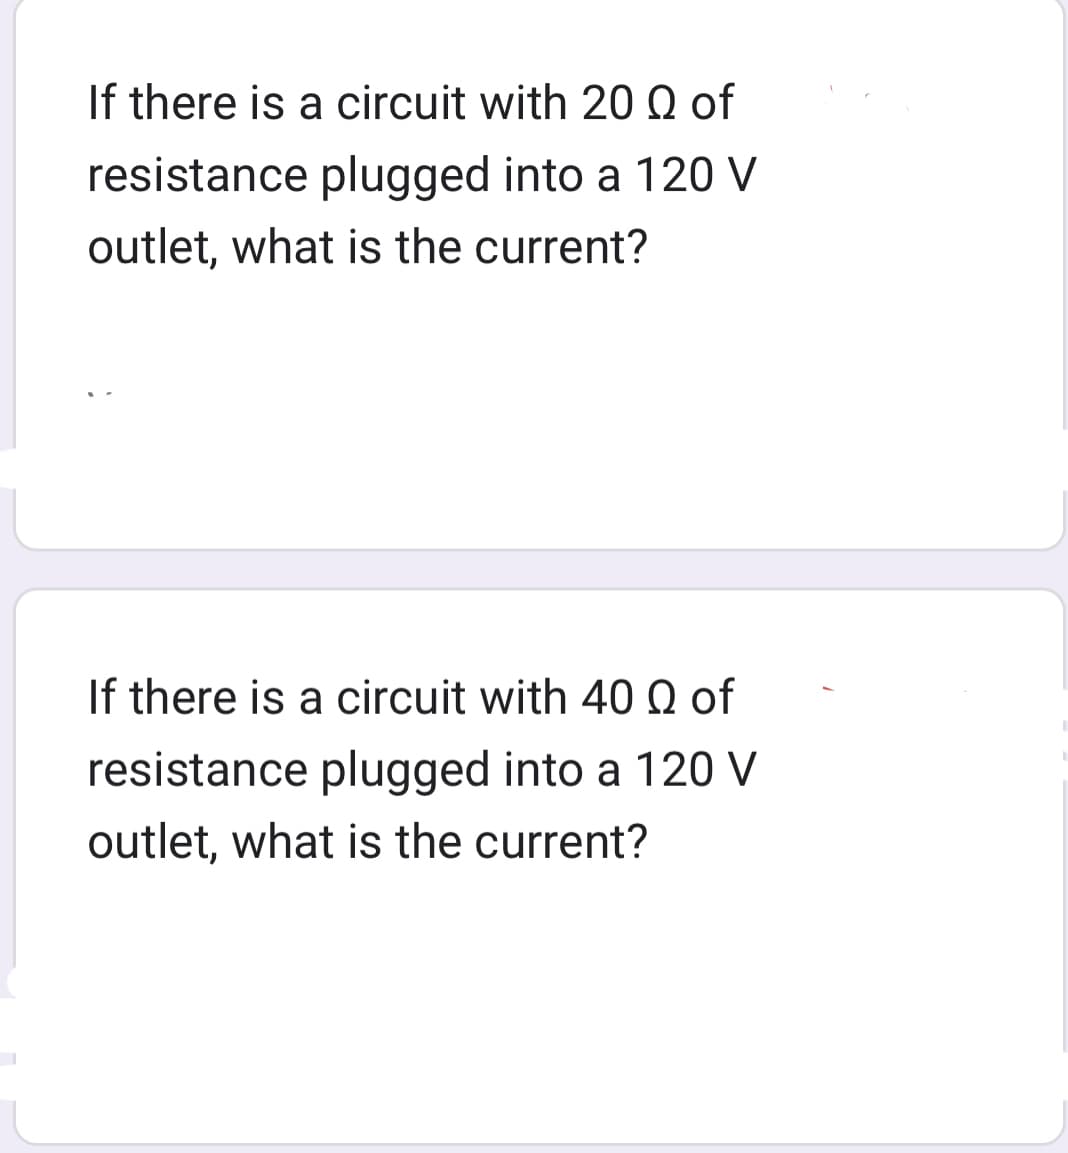 If there is a circuit with 20 Q of
resistance plugged into a 120 V
outlet, what is the current?
If there is a circuit with 40 Q of
resistance plugged into a 120 V
outlet, what is the current?